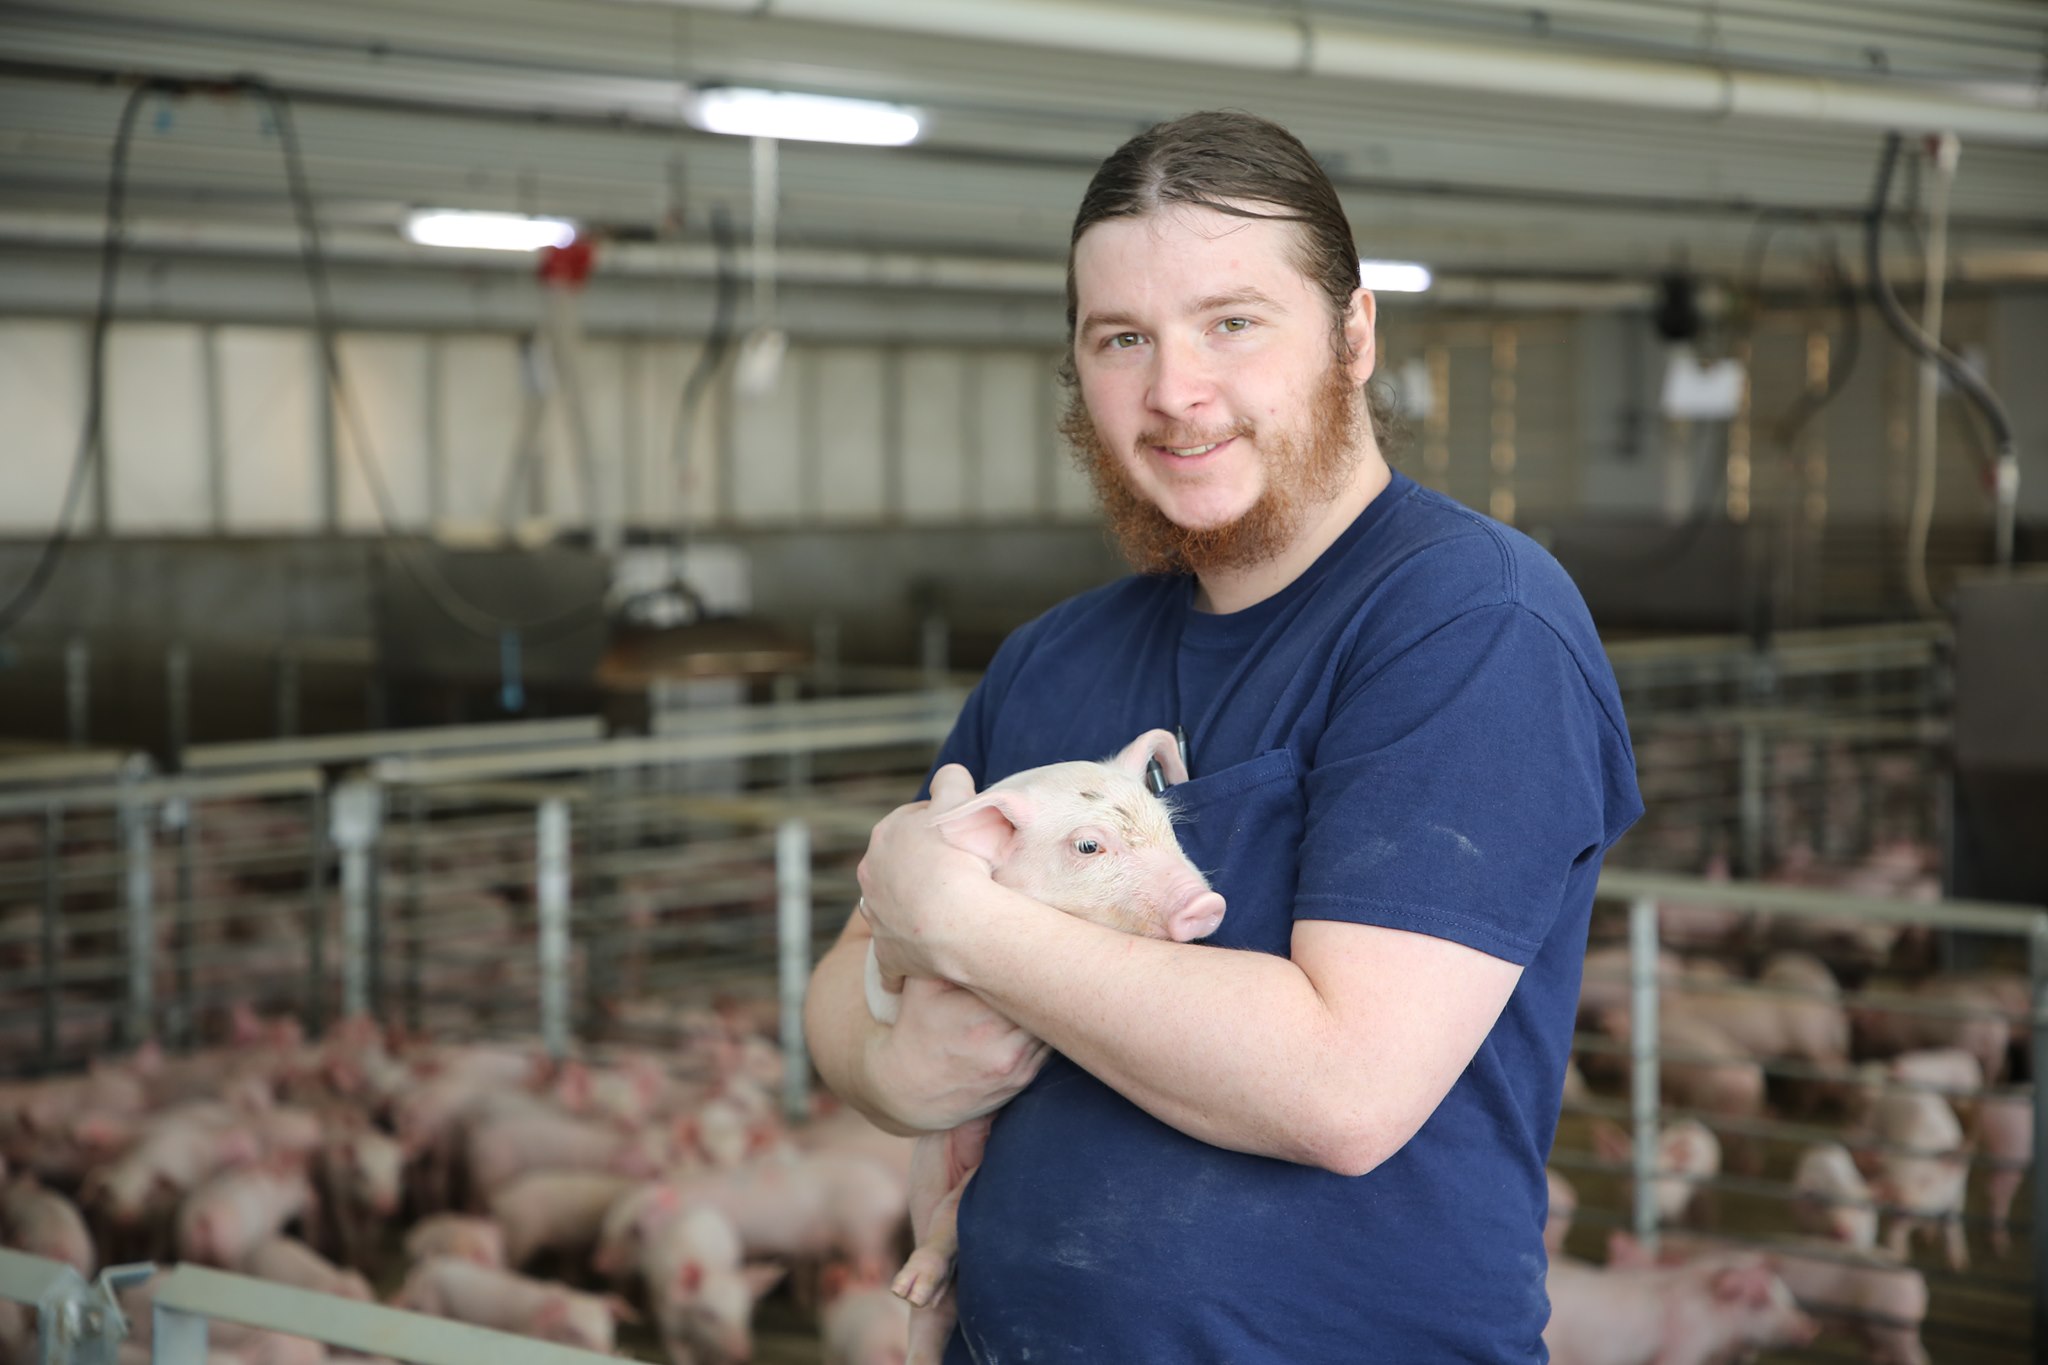 Cody holds a young pig.